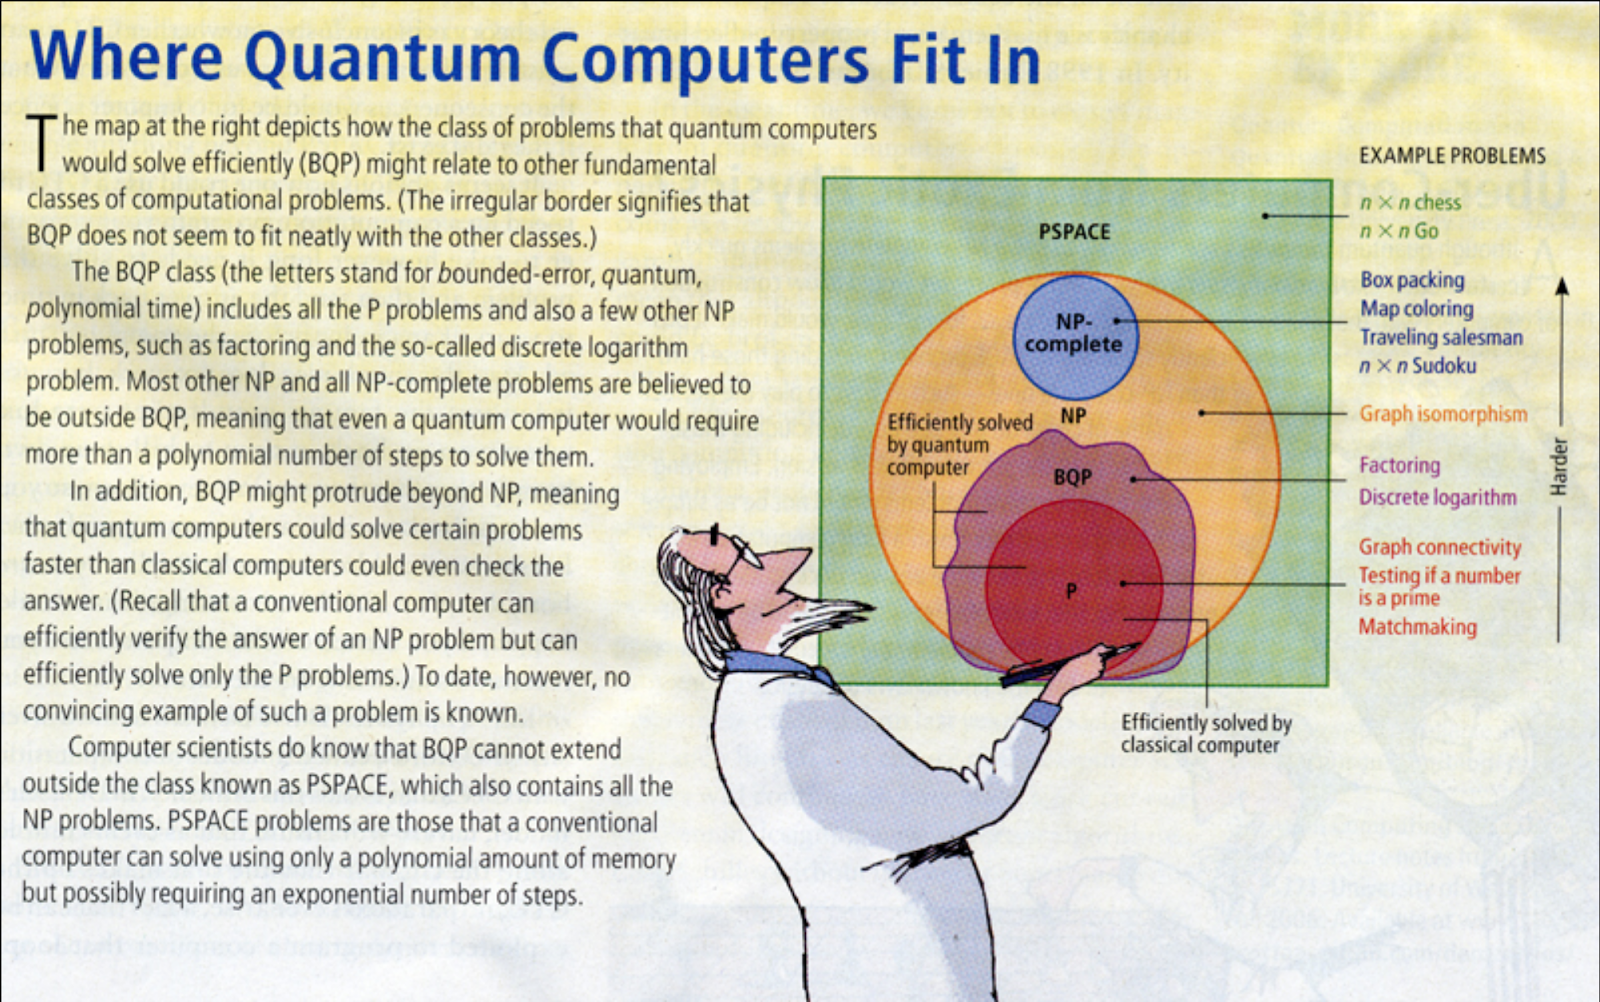 Google claims to have demonstrated “quantum supremacy”